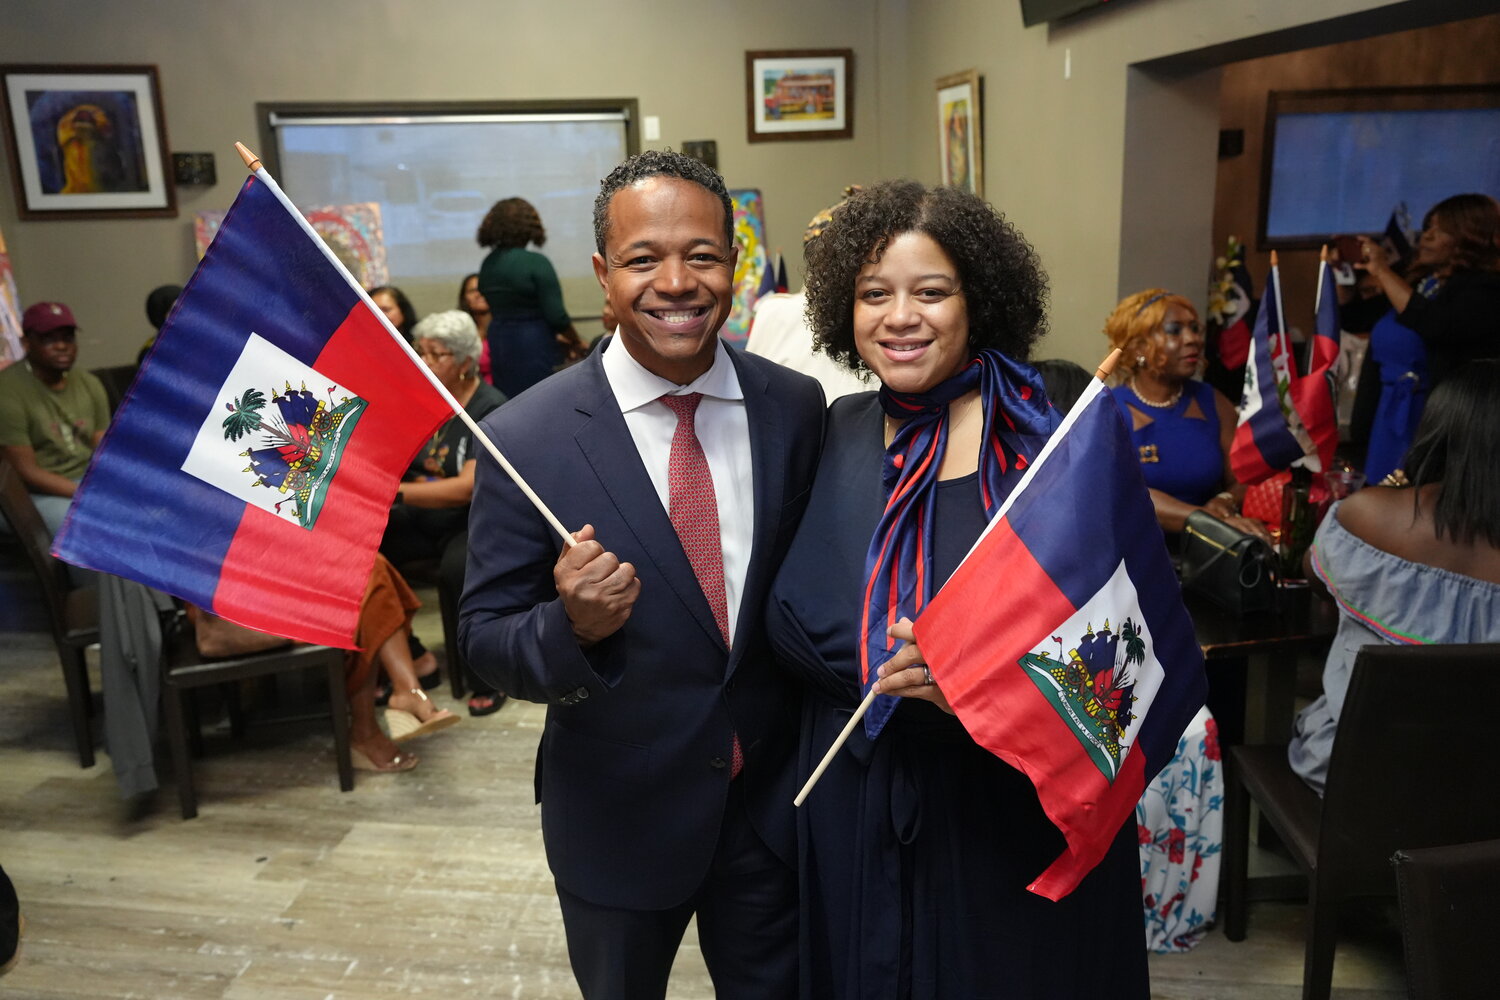 Legislator Carrié Solages, left, and Assemblywoman Michaelle Solages showed off their Haitian pride during the annual Haitian Heritage Month Celebration in Valley Stream, which the siblings organized together.